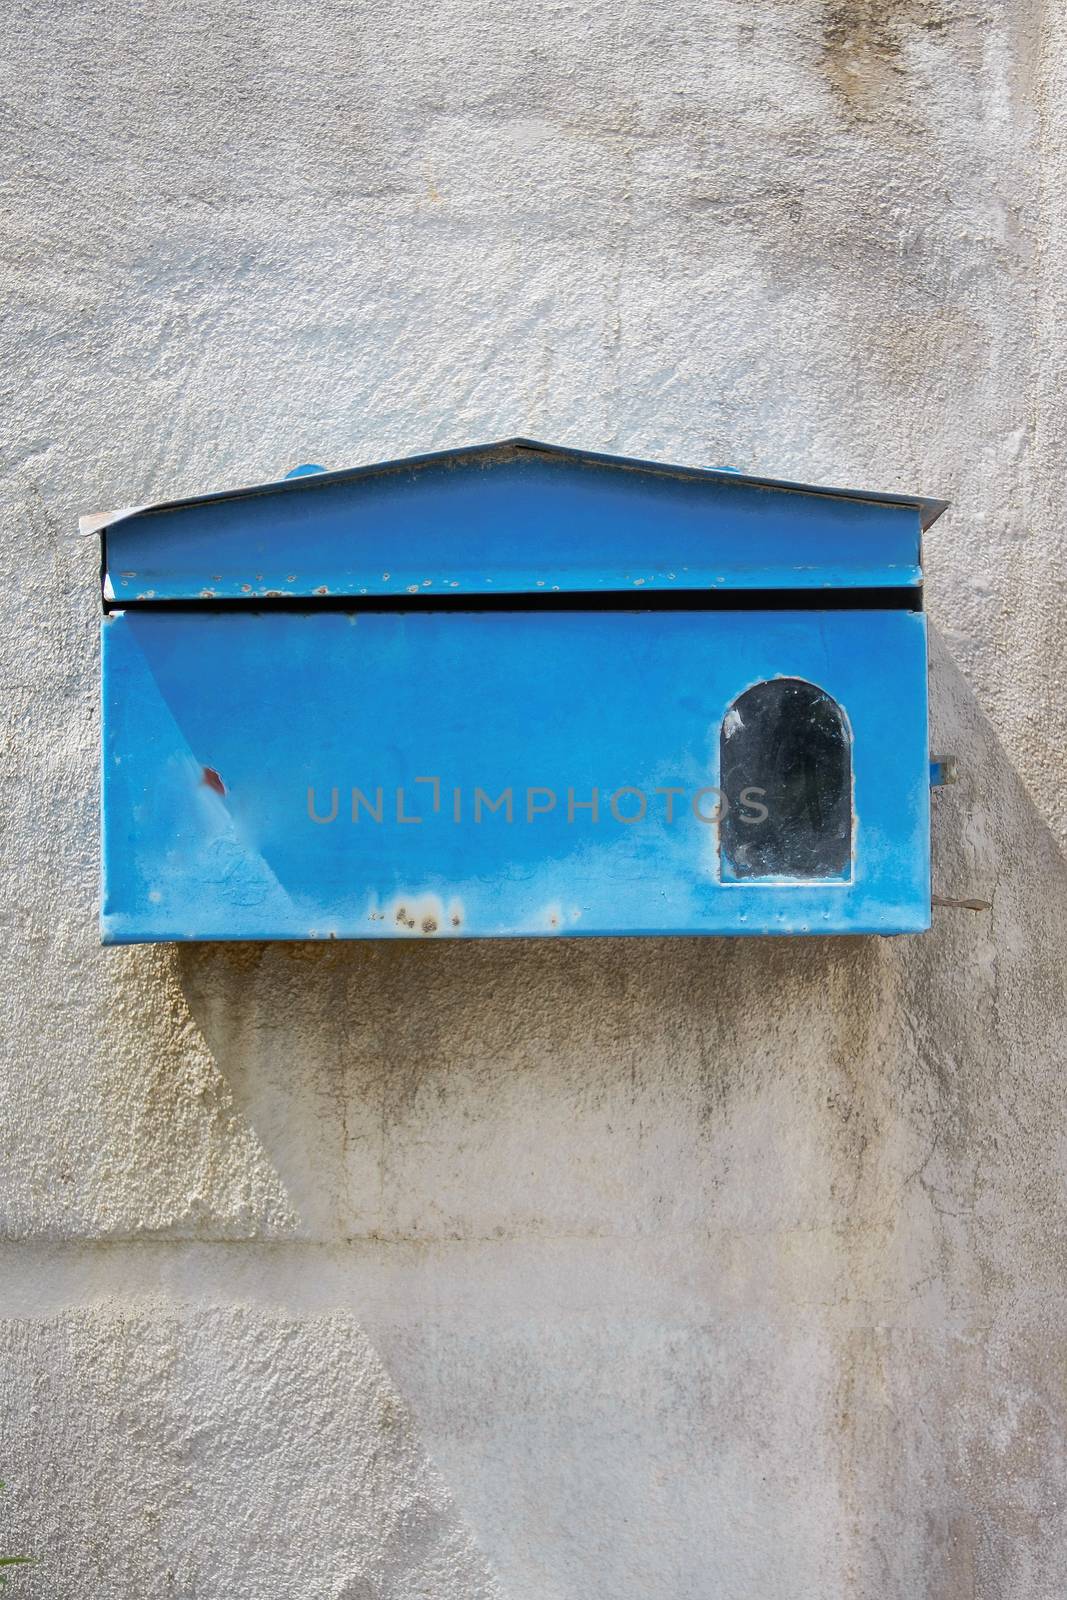 old blue mailbox on cement wall